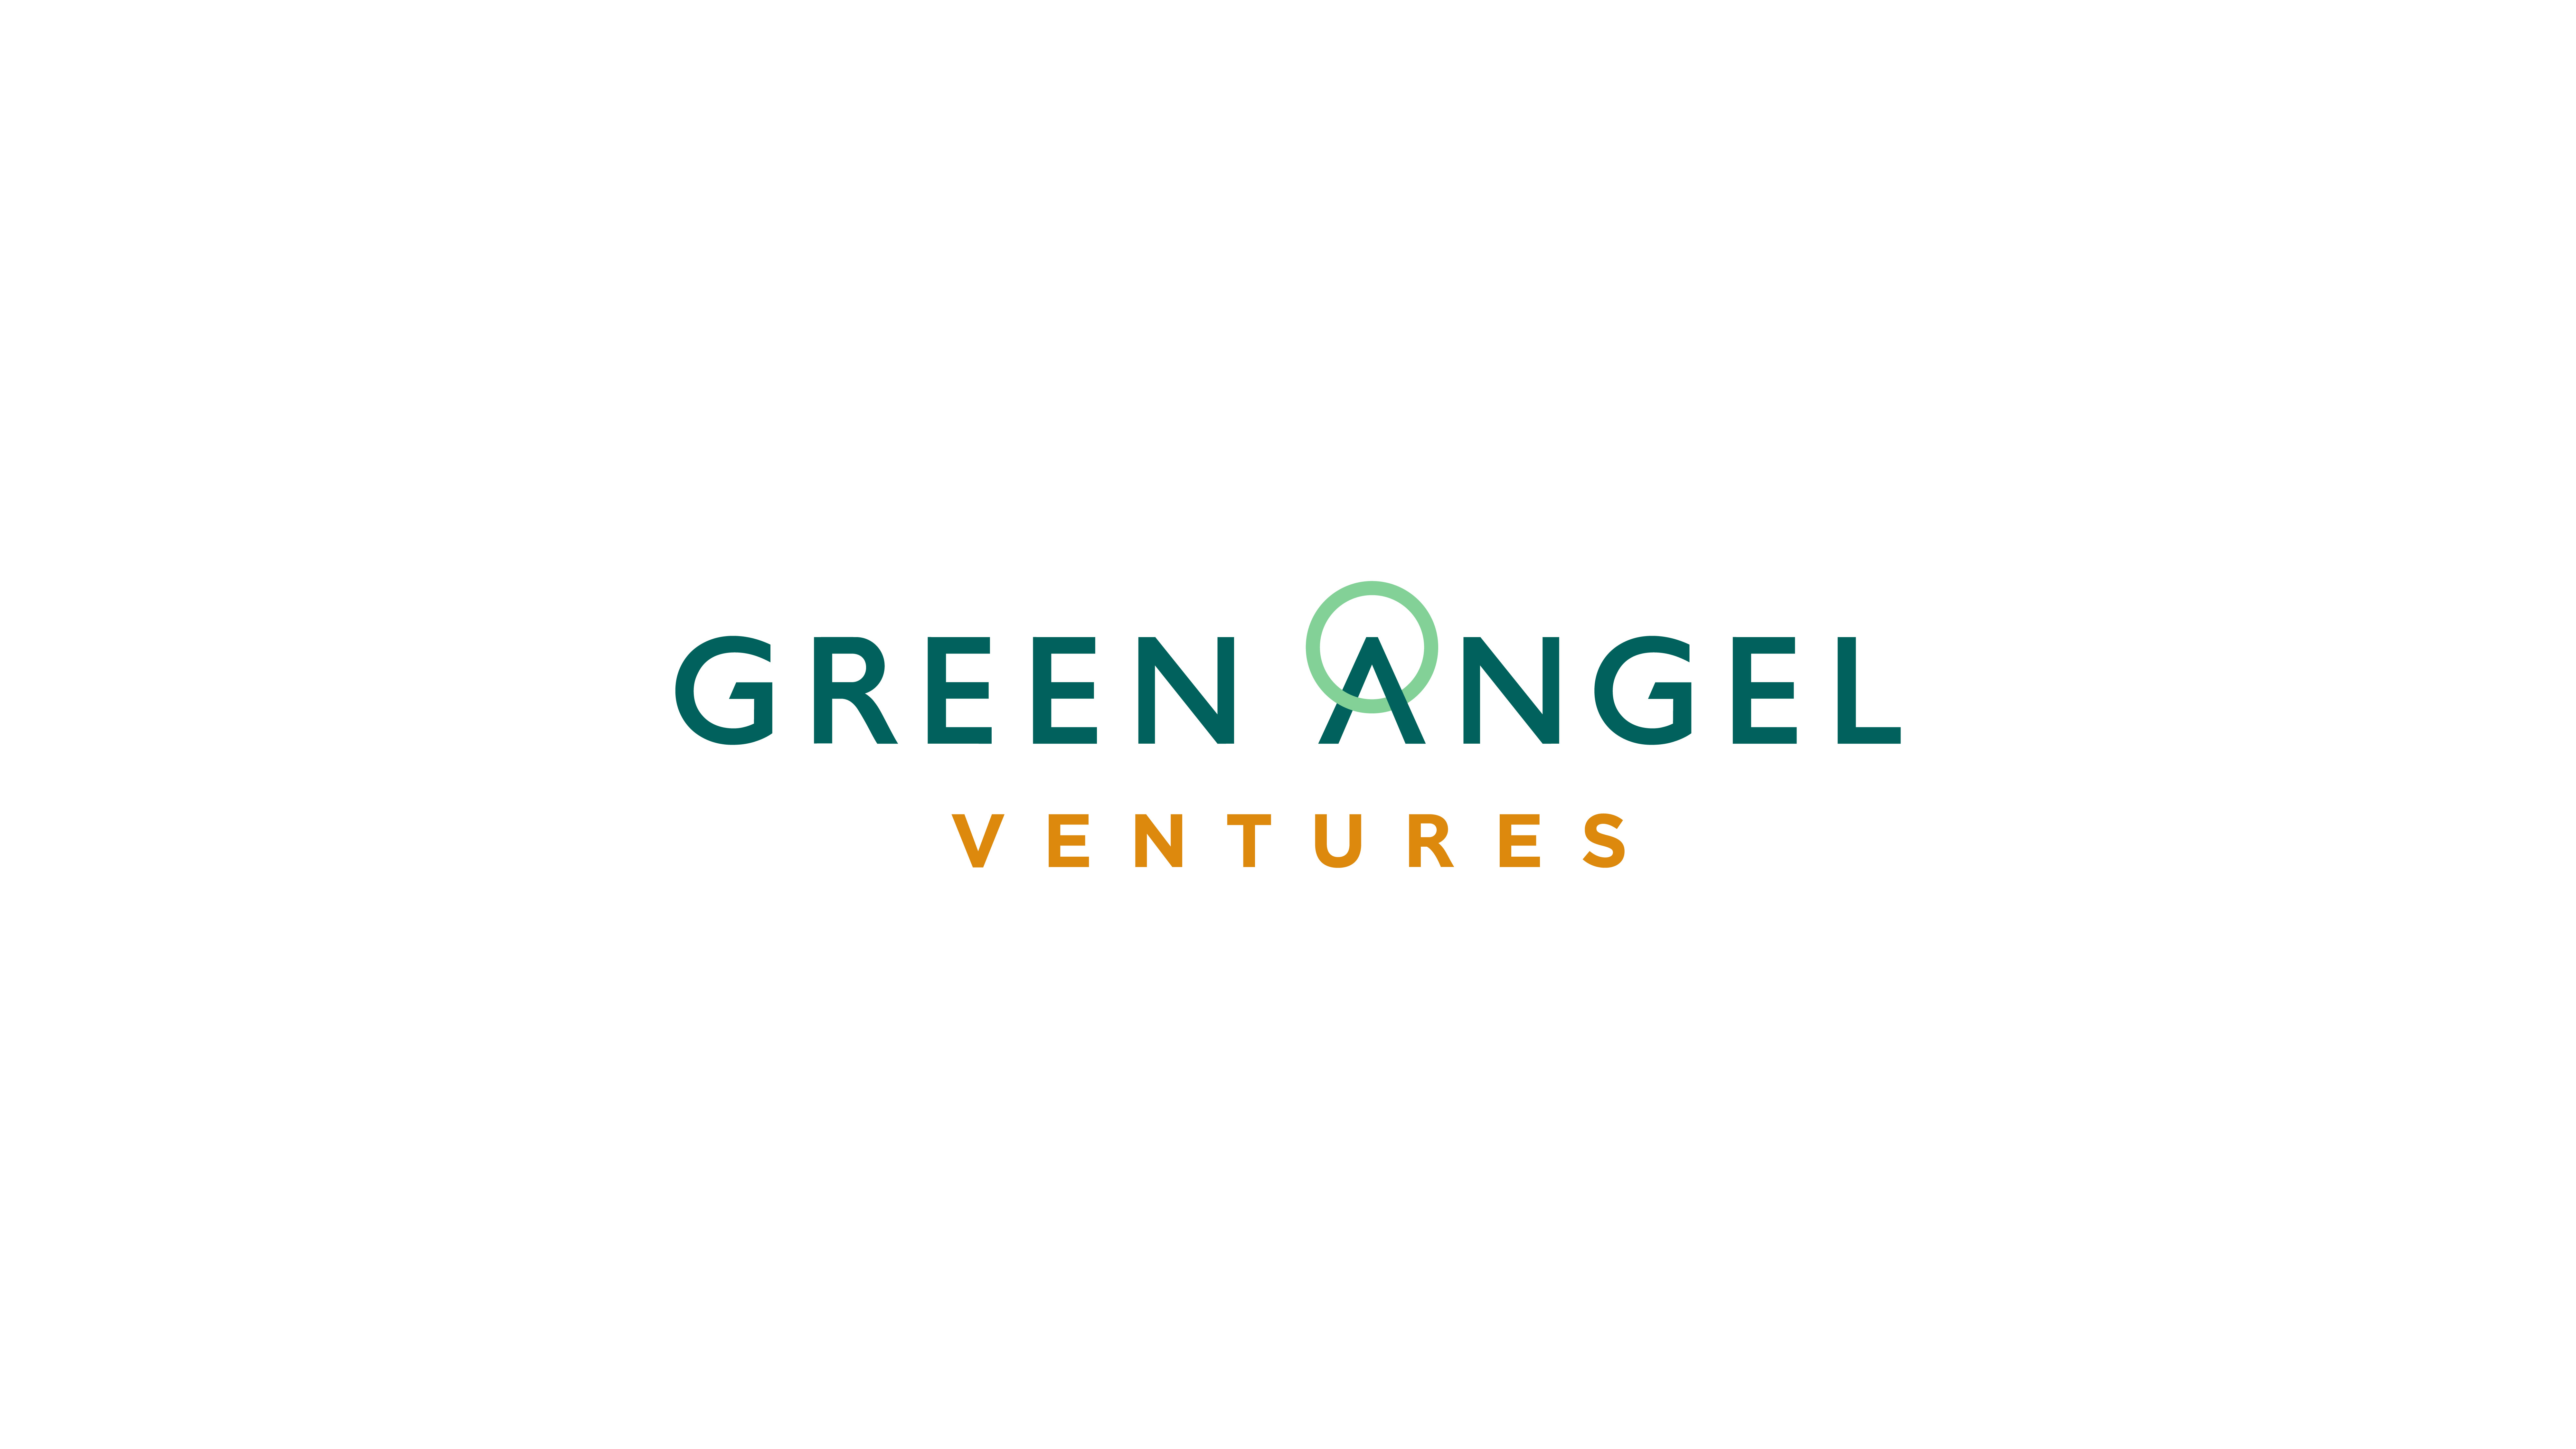 Lewis Moberly Creates Striking New Name & Identity for Climate Change Investment Group Green Angel Ventures